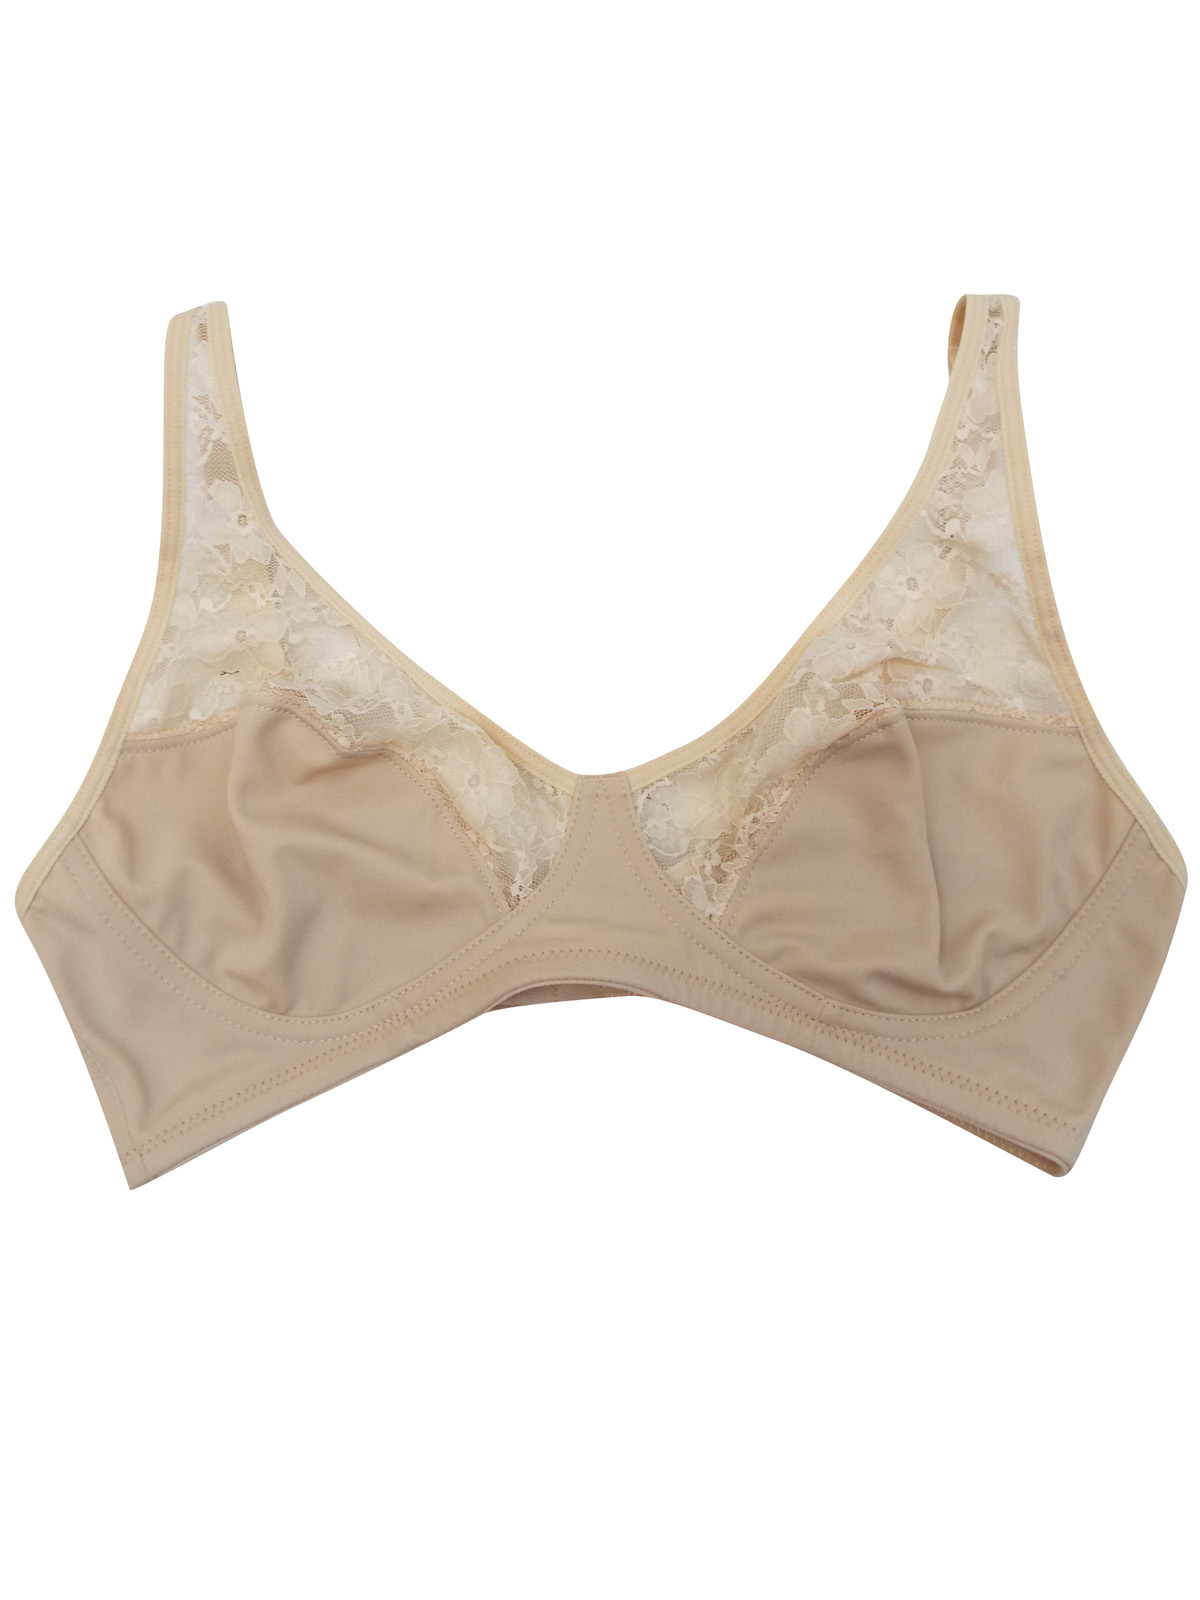 Naturana - - Naturana CARAMEL Floral Lace Non-Wired Soft Cup Bra - Size 34B